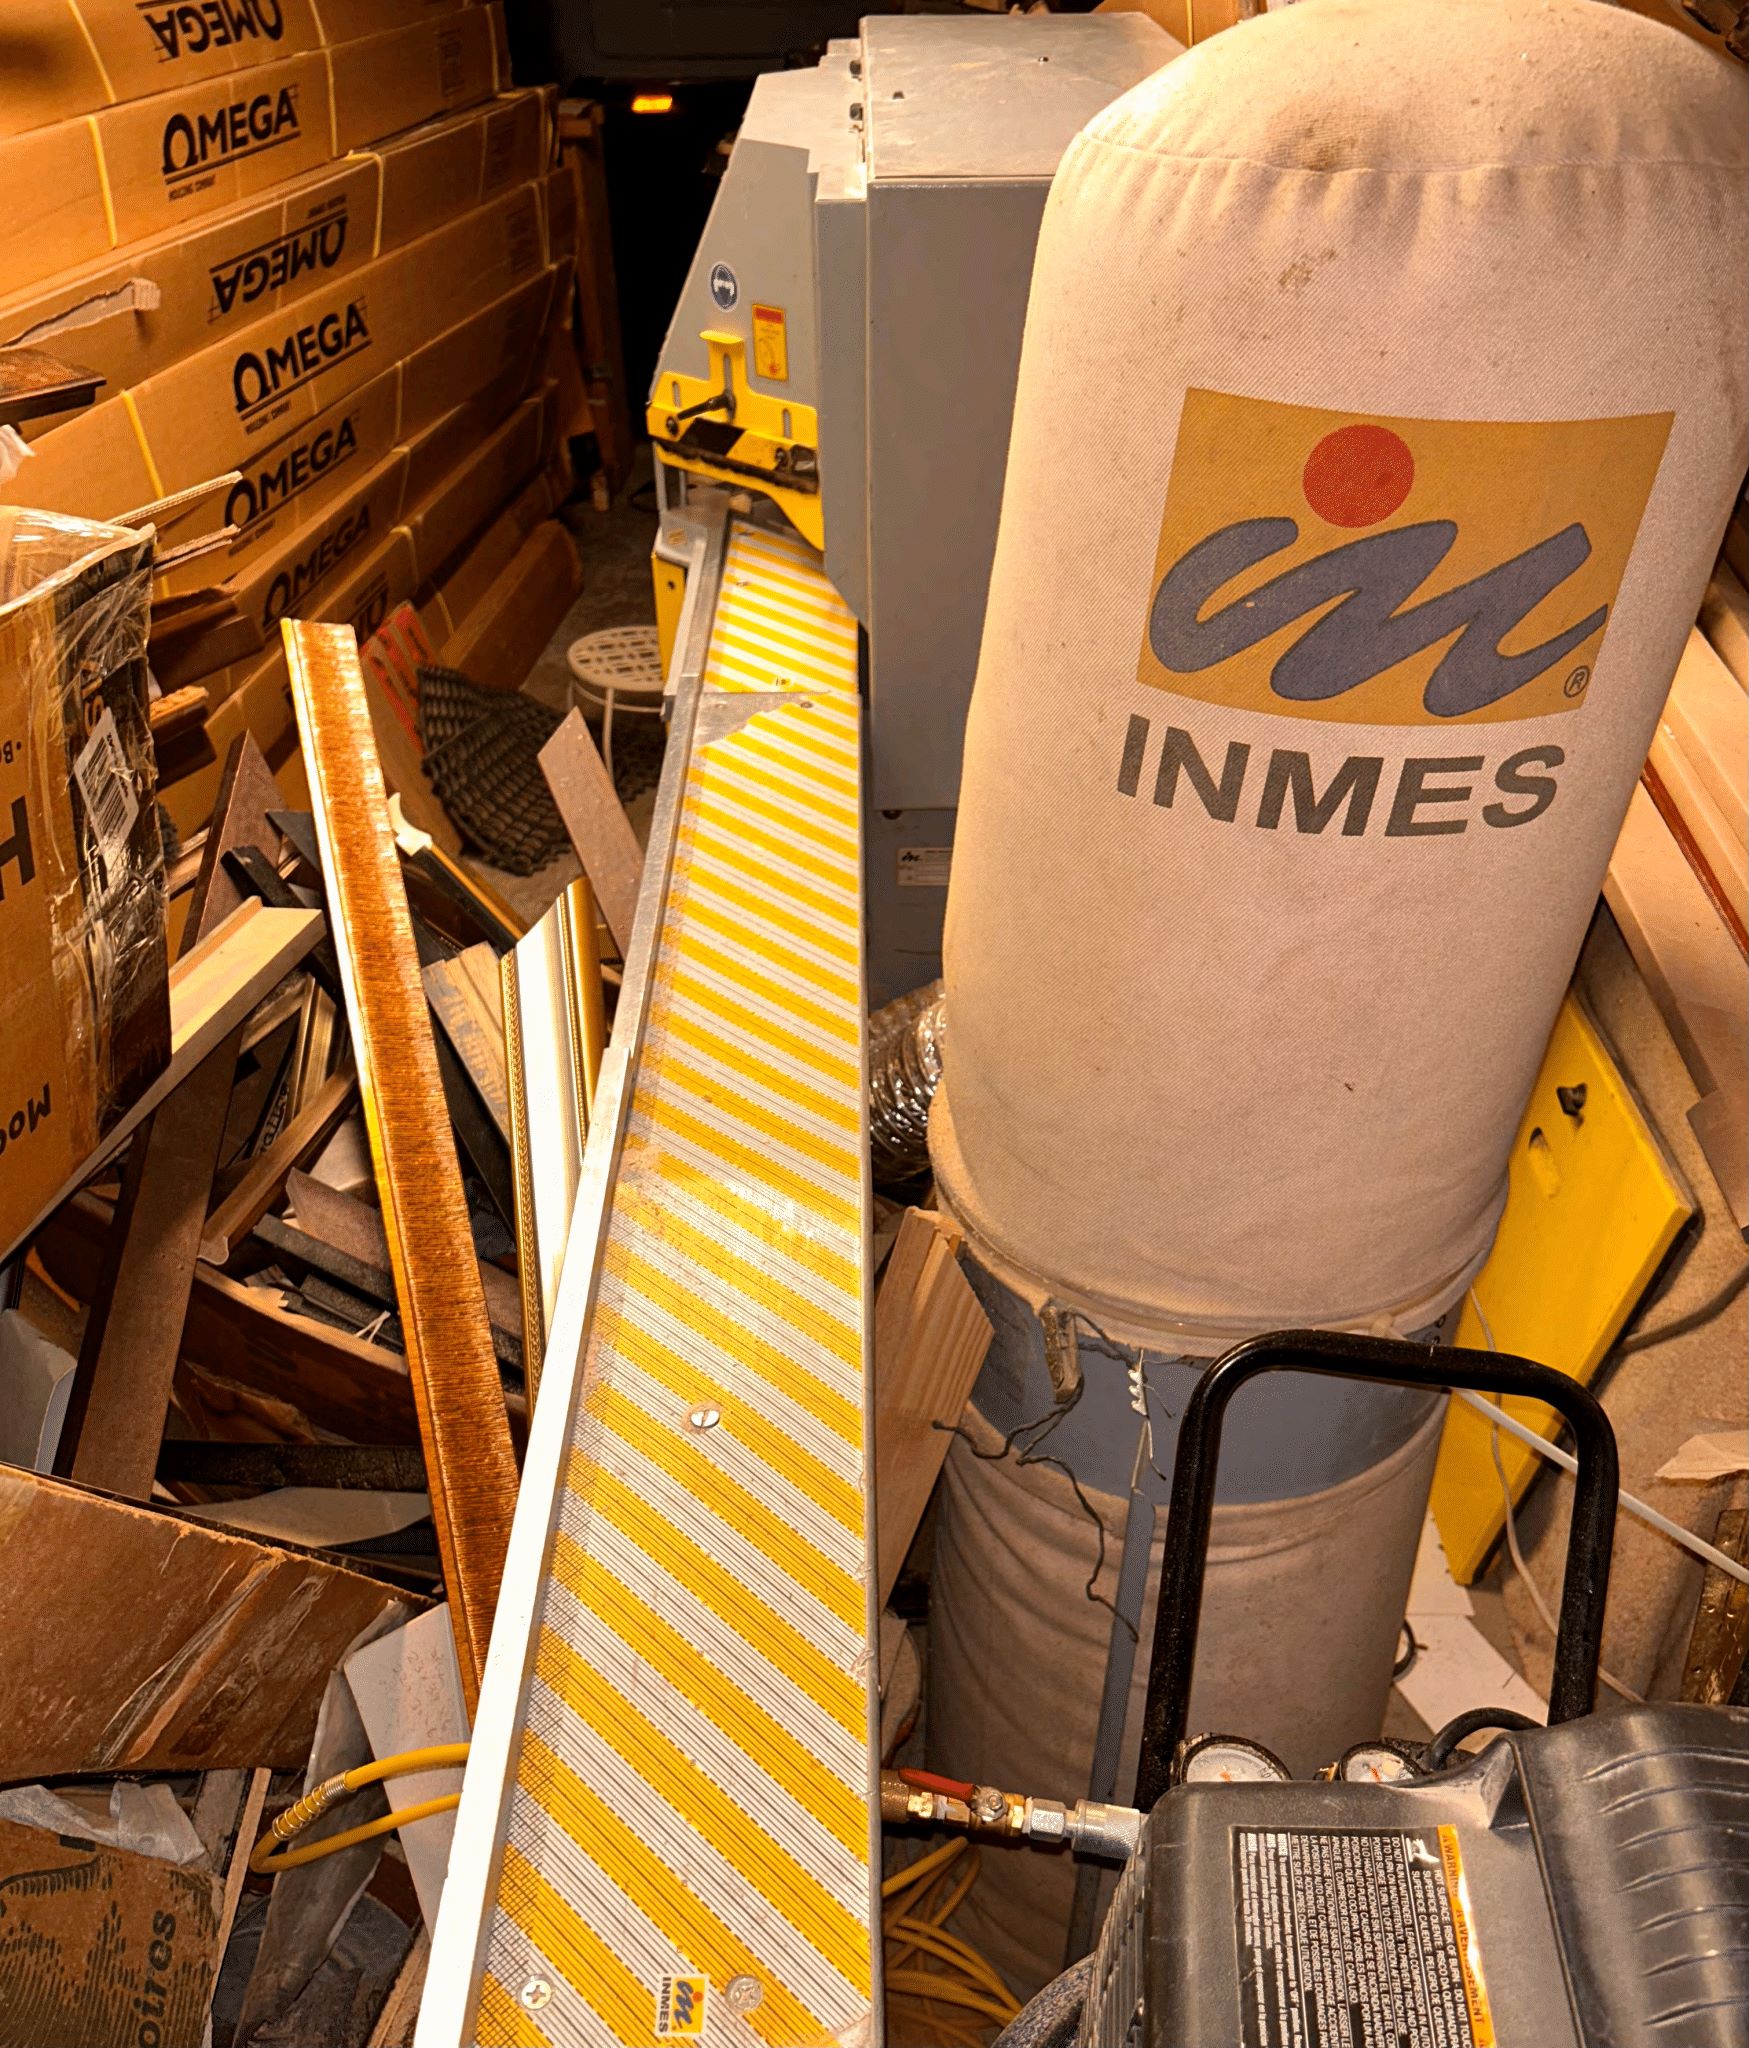 INMES IM-300PL Double Miter Saw (Used) Item # UE-101723A